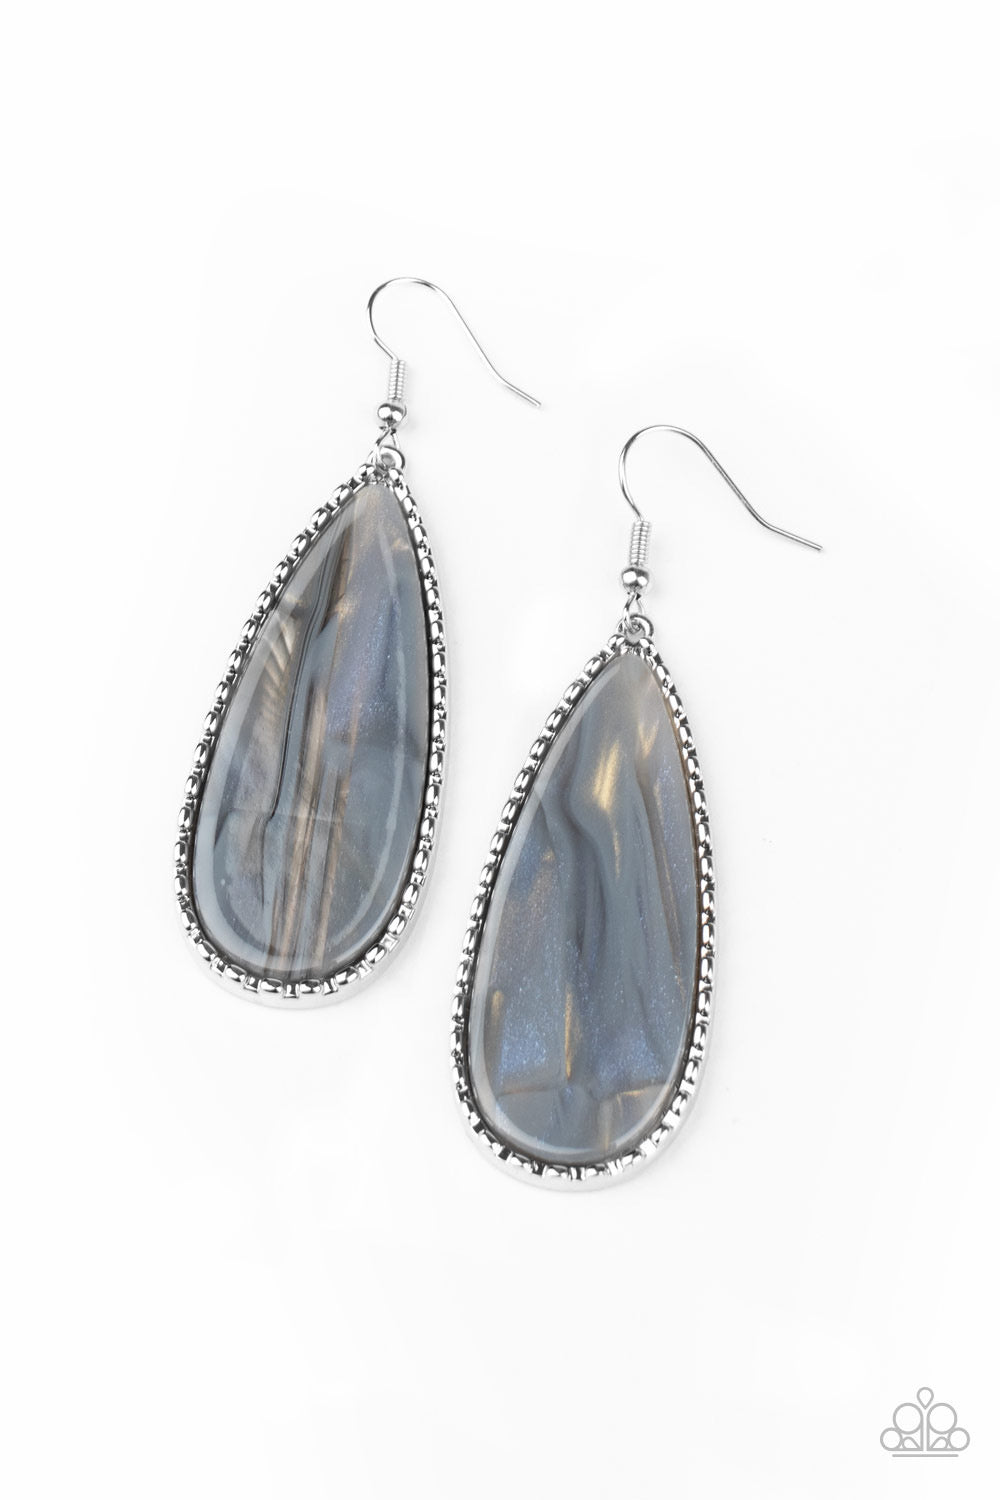 Ethereal Eloquence Earrings - Silver